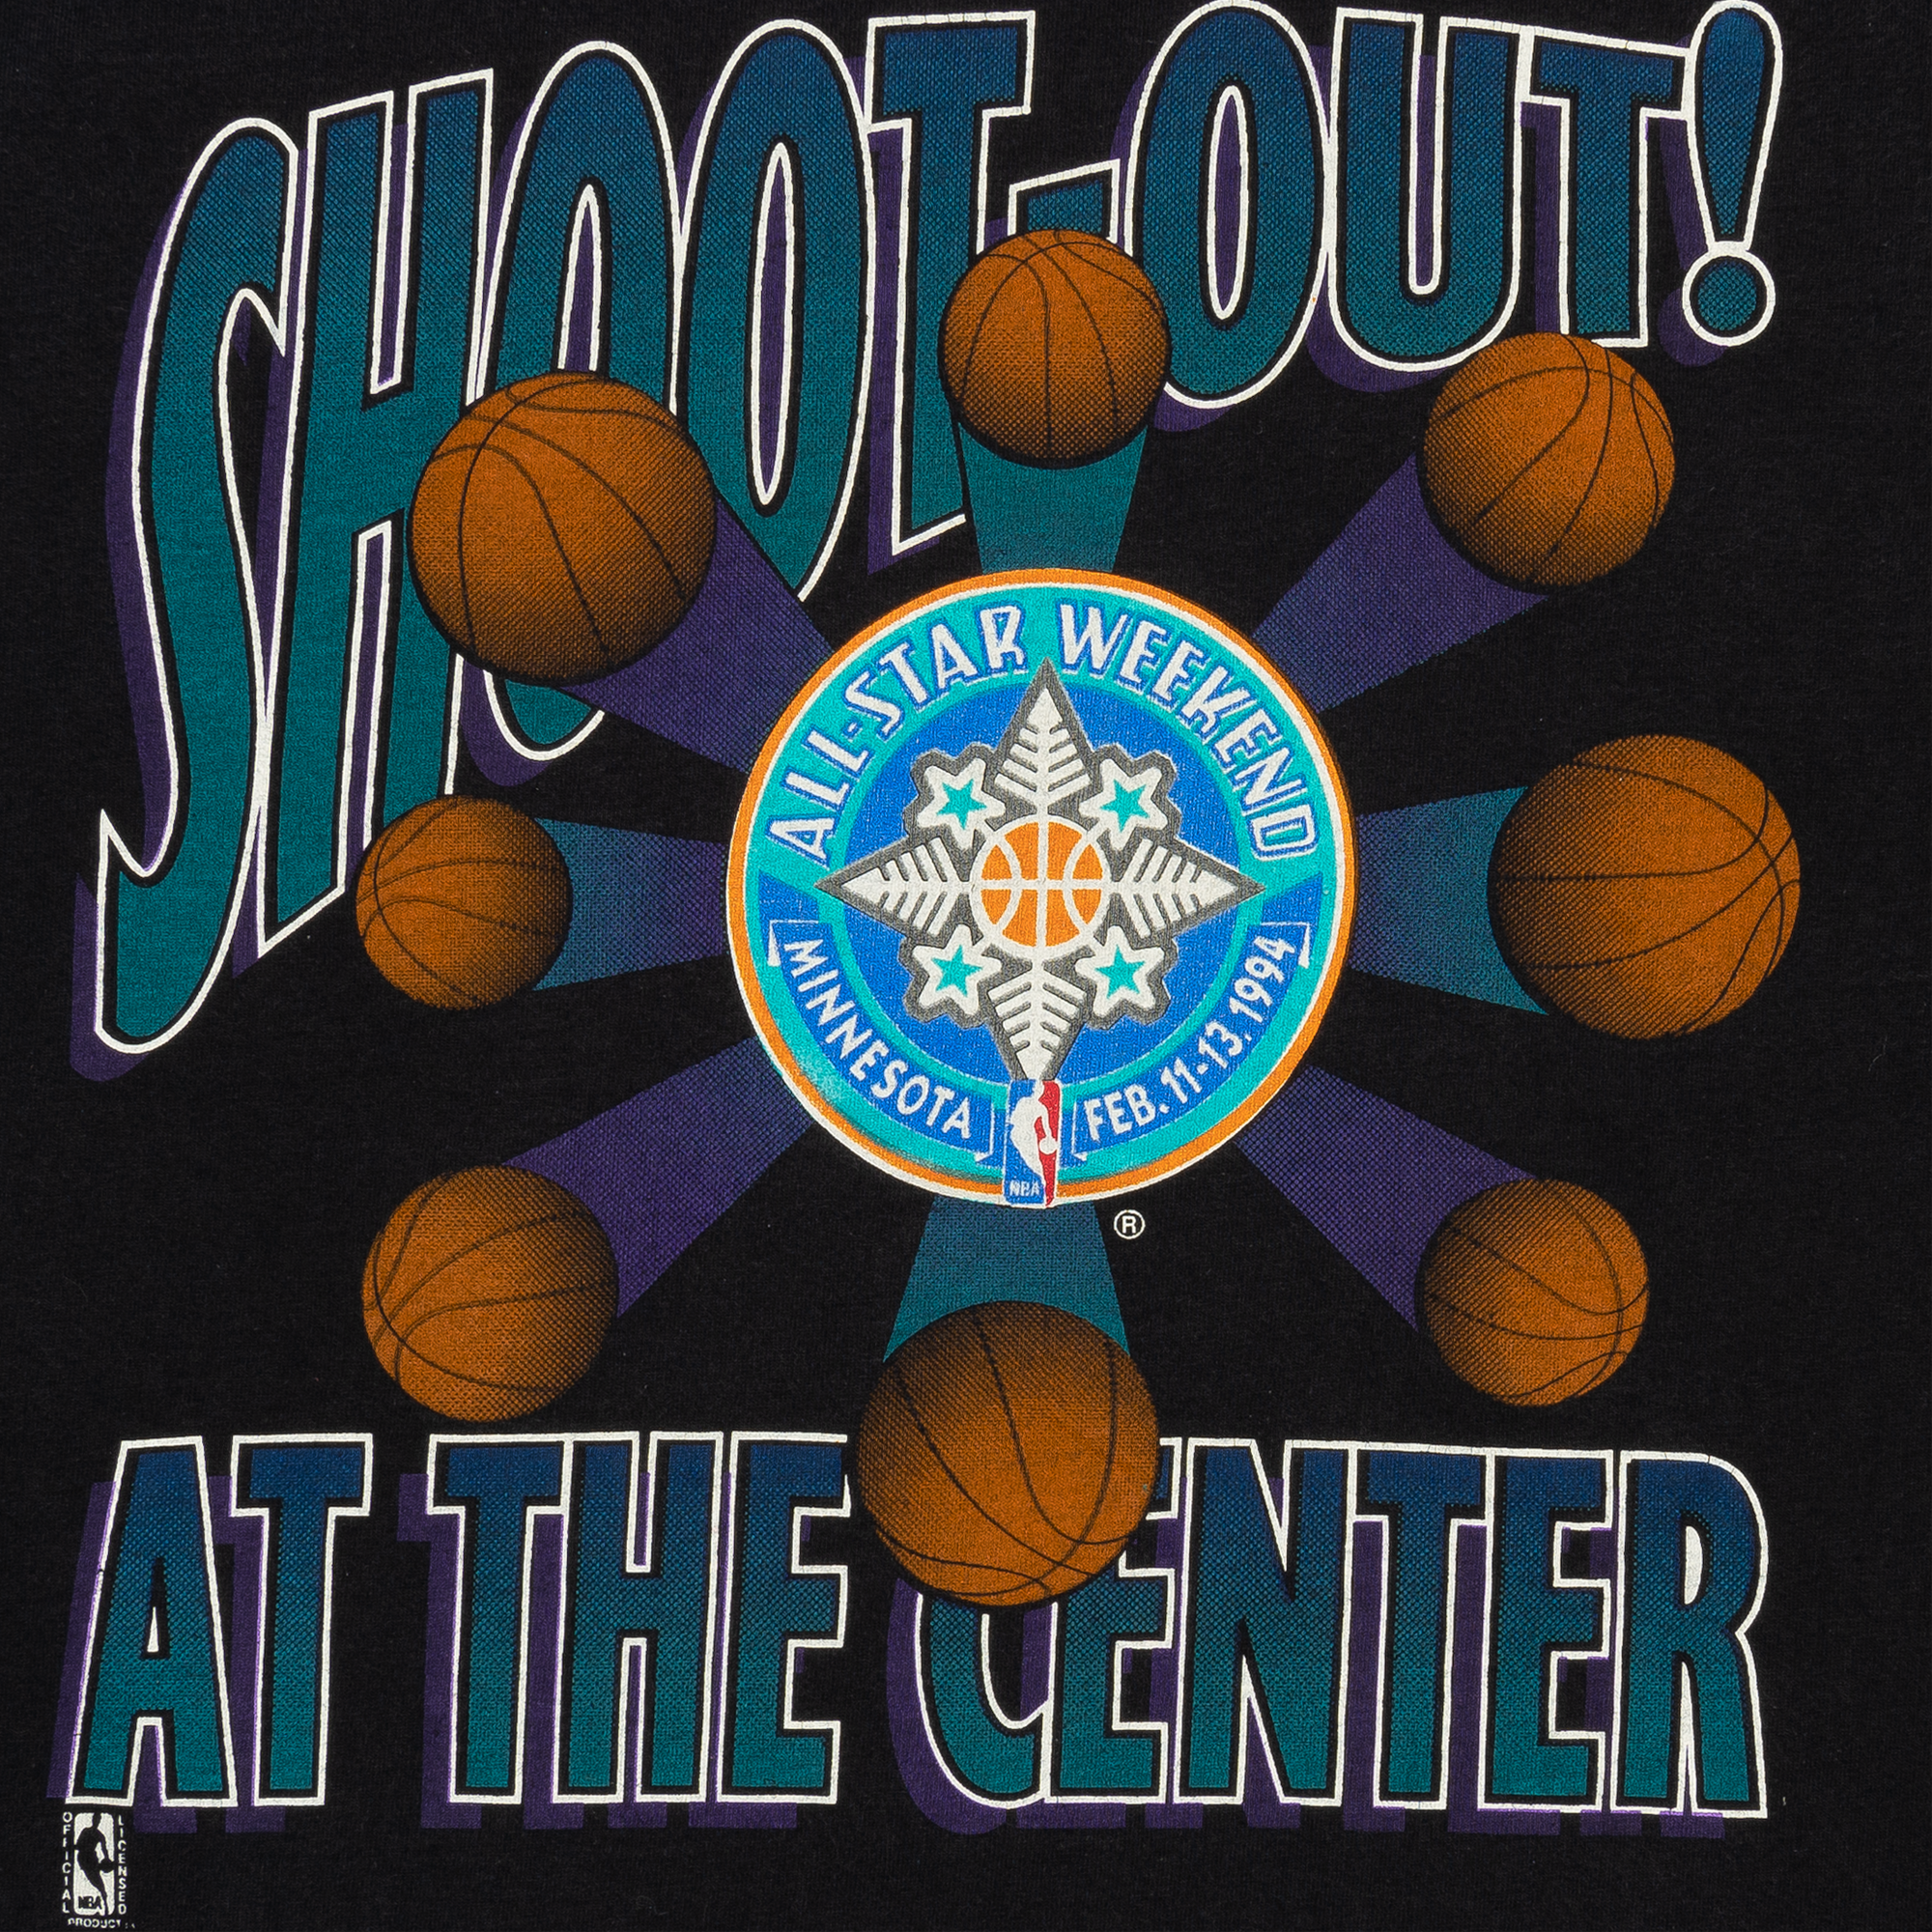 All Star Weekend Shoot-Out At The Centre 1994 NBA Tee Black-PLUS